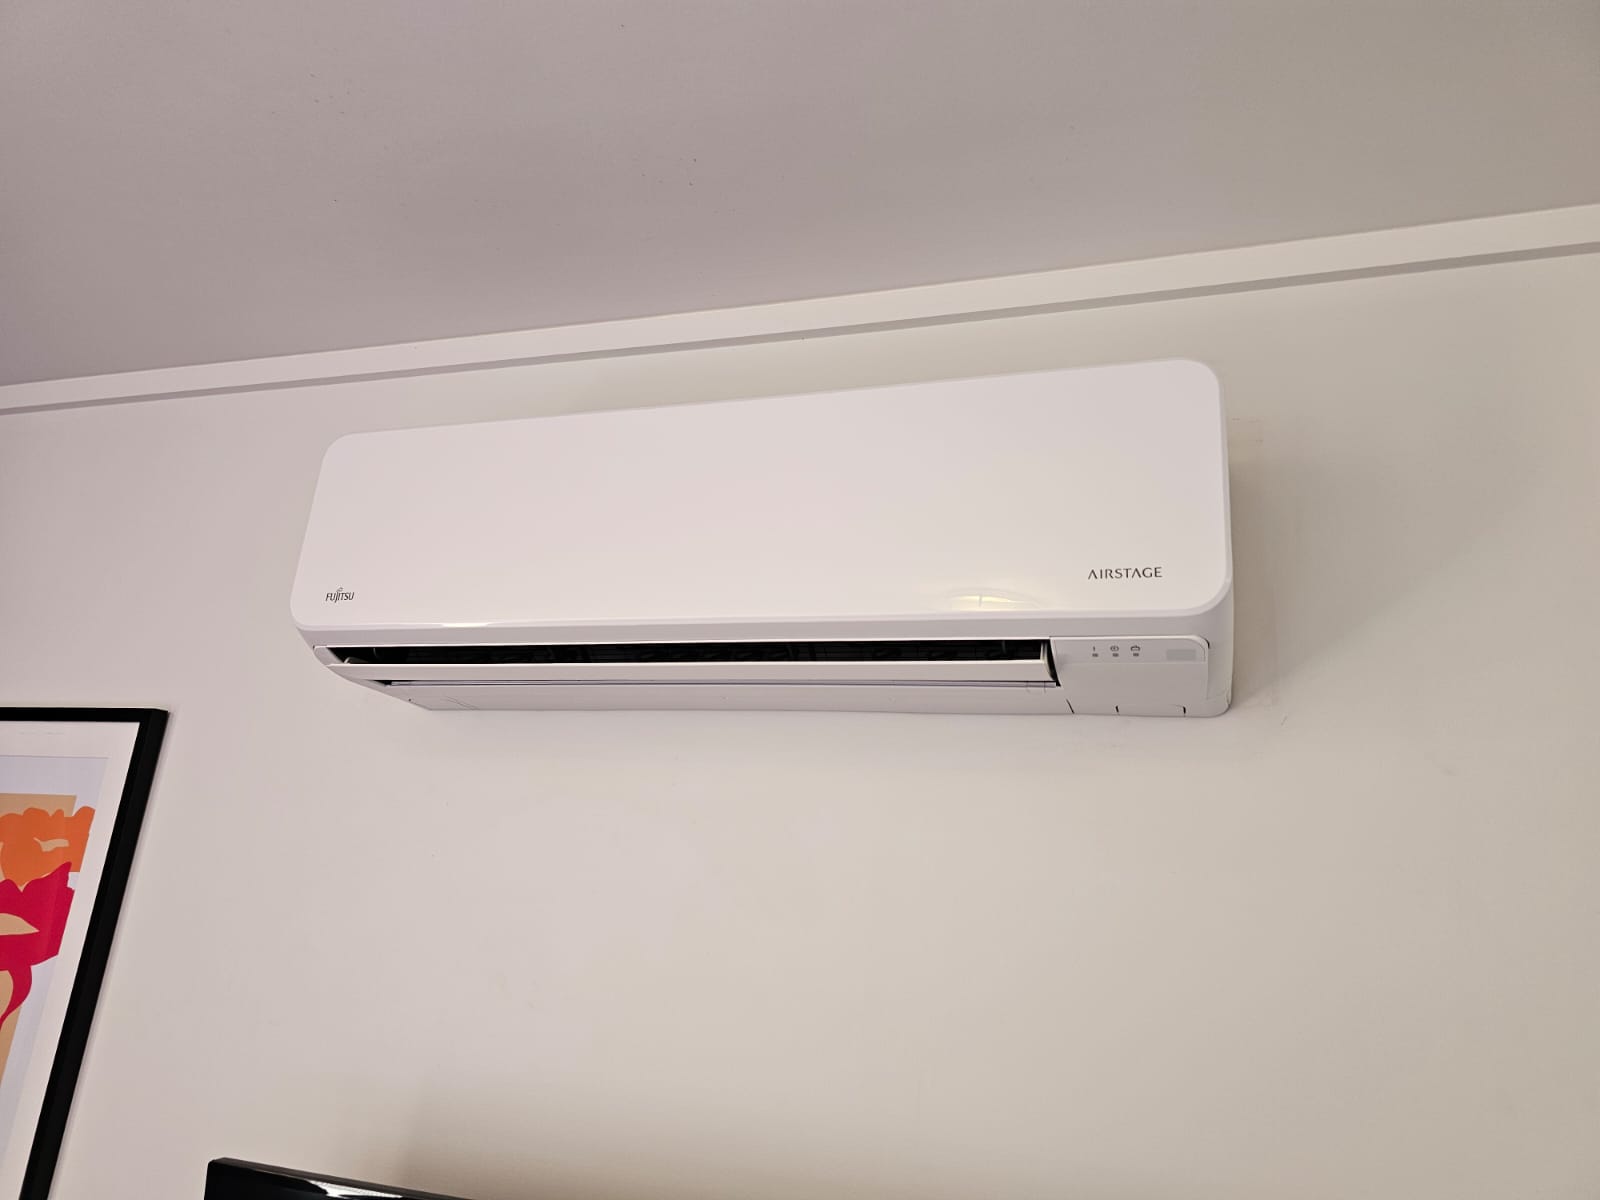 Residential Air Conditioning Unit in Perth installed on wall